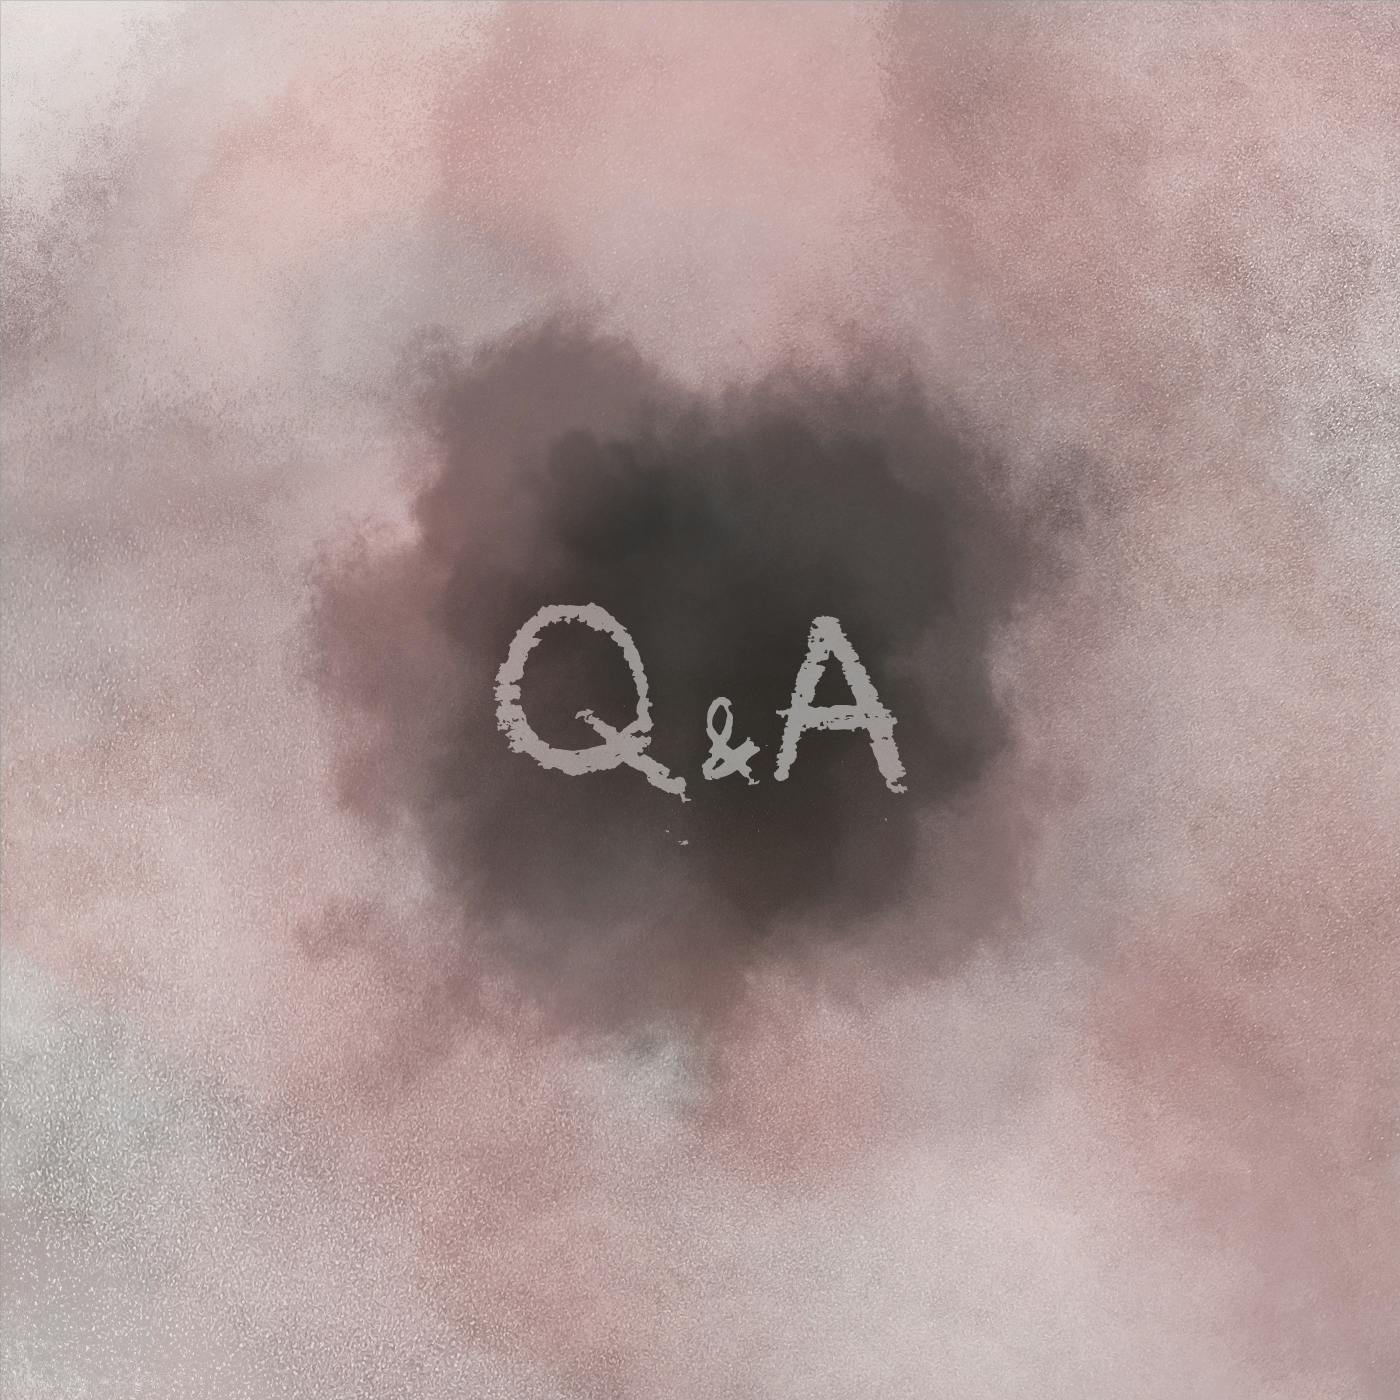 Q&A 9.16.18 by Tenderfoot TV